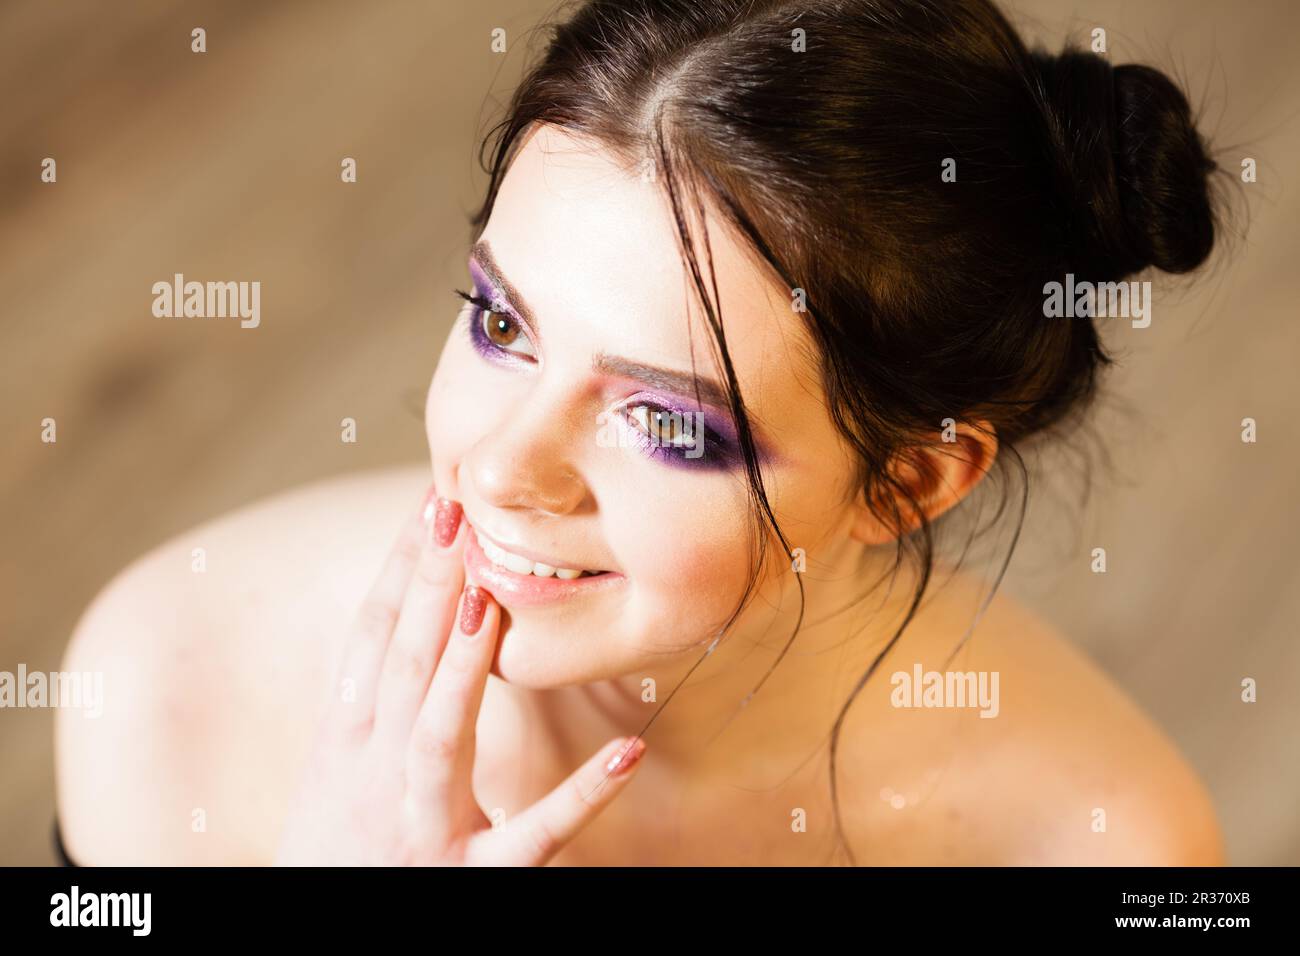 Empty makeup palette hi-res stock photography and images - Alamy